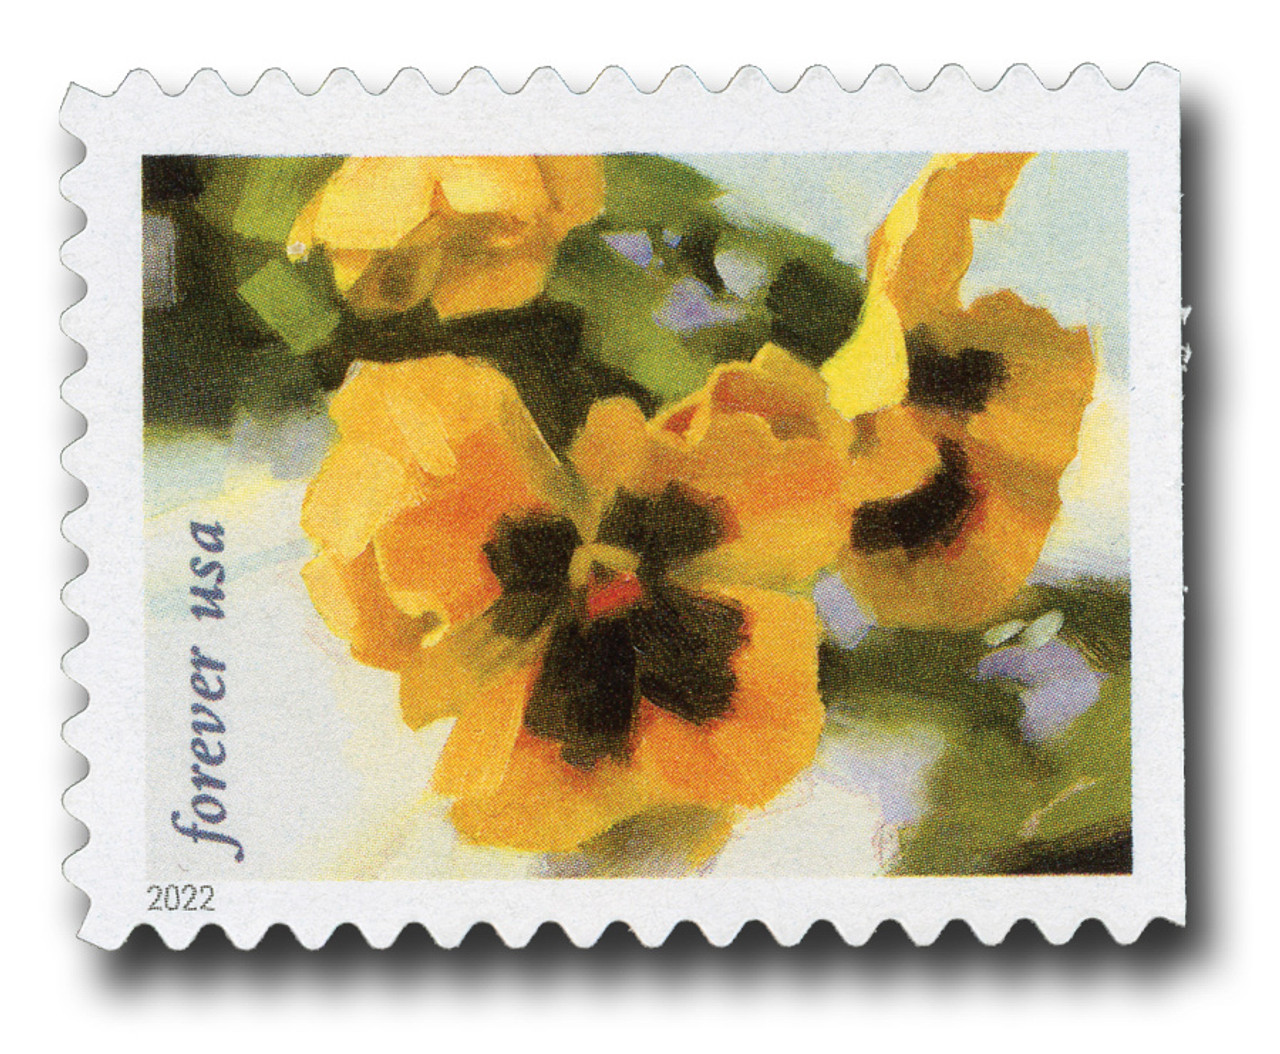 Pansy Flower Stamp Set | Technique Tuesday